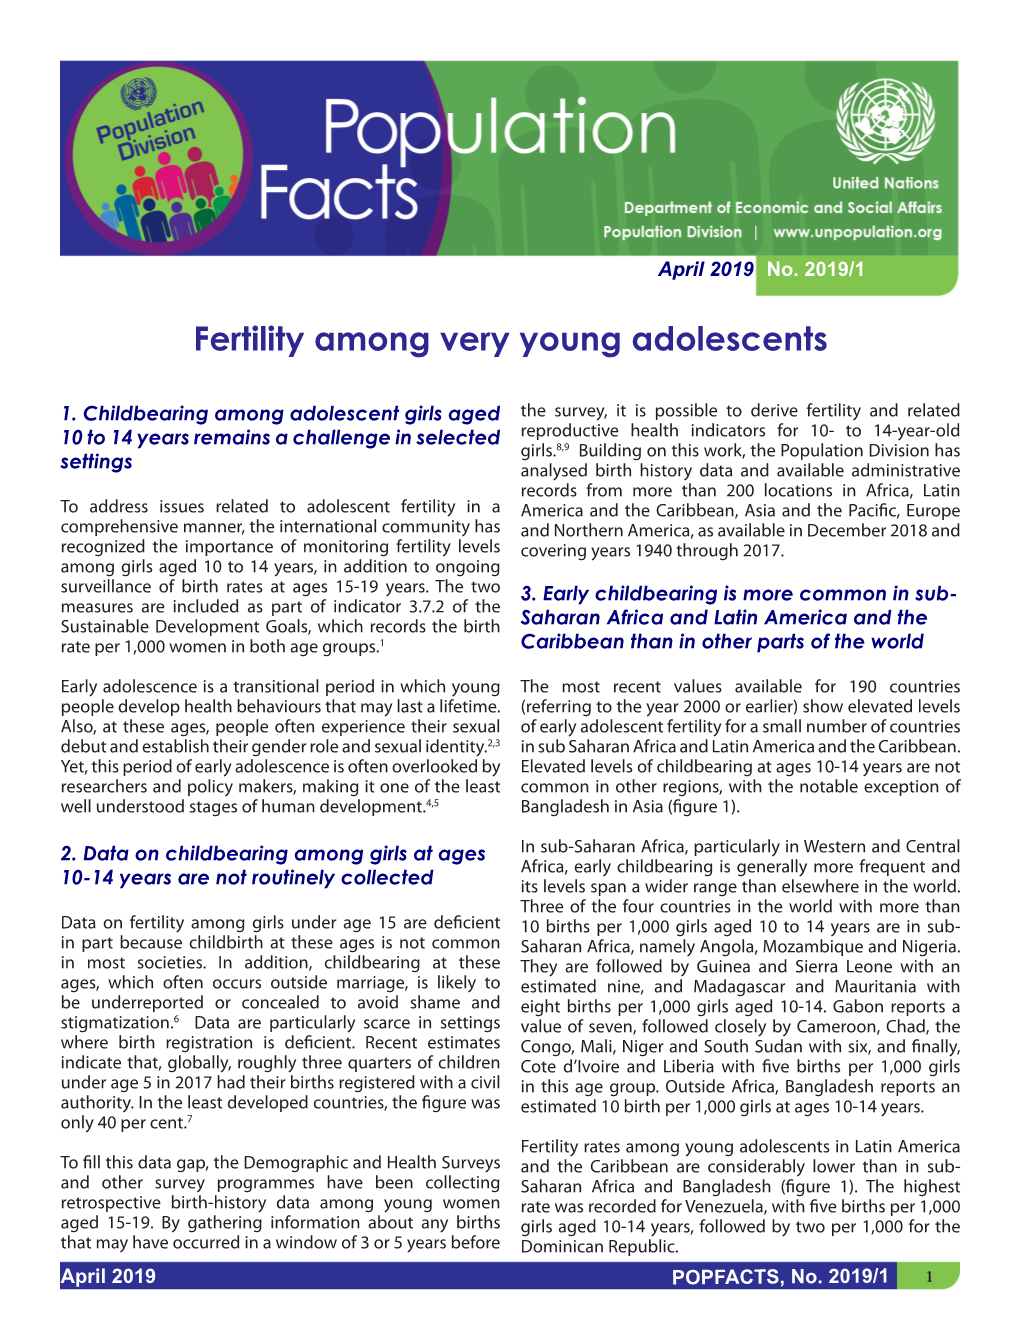 Fertility Among Very Young Adolescents